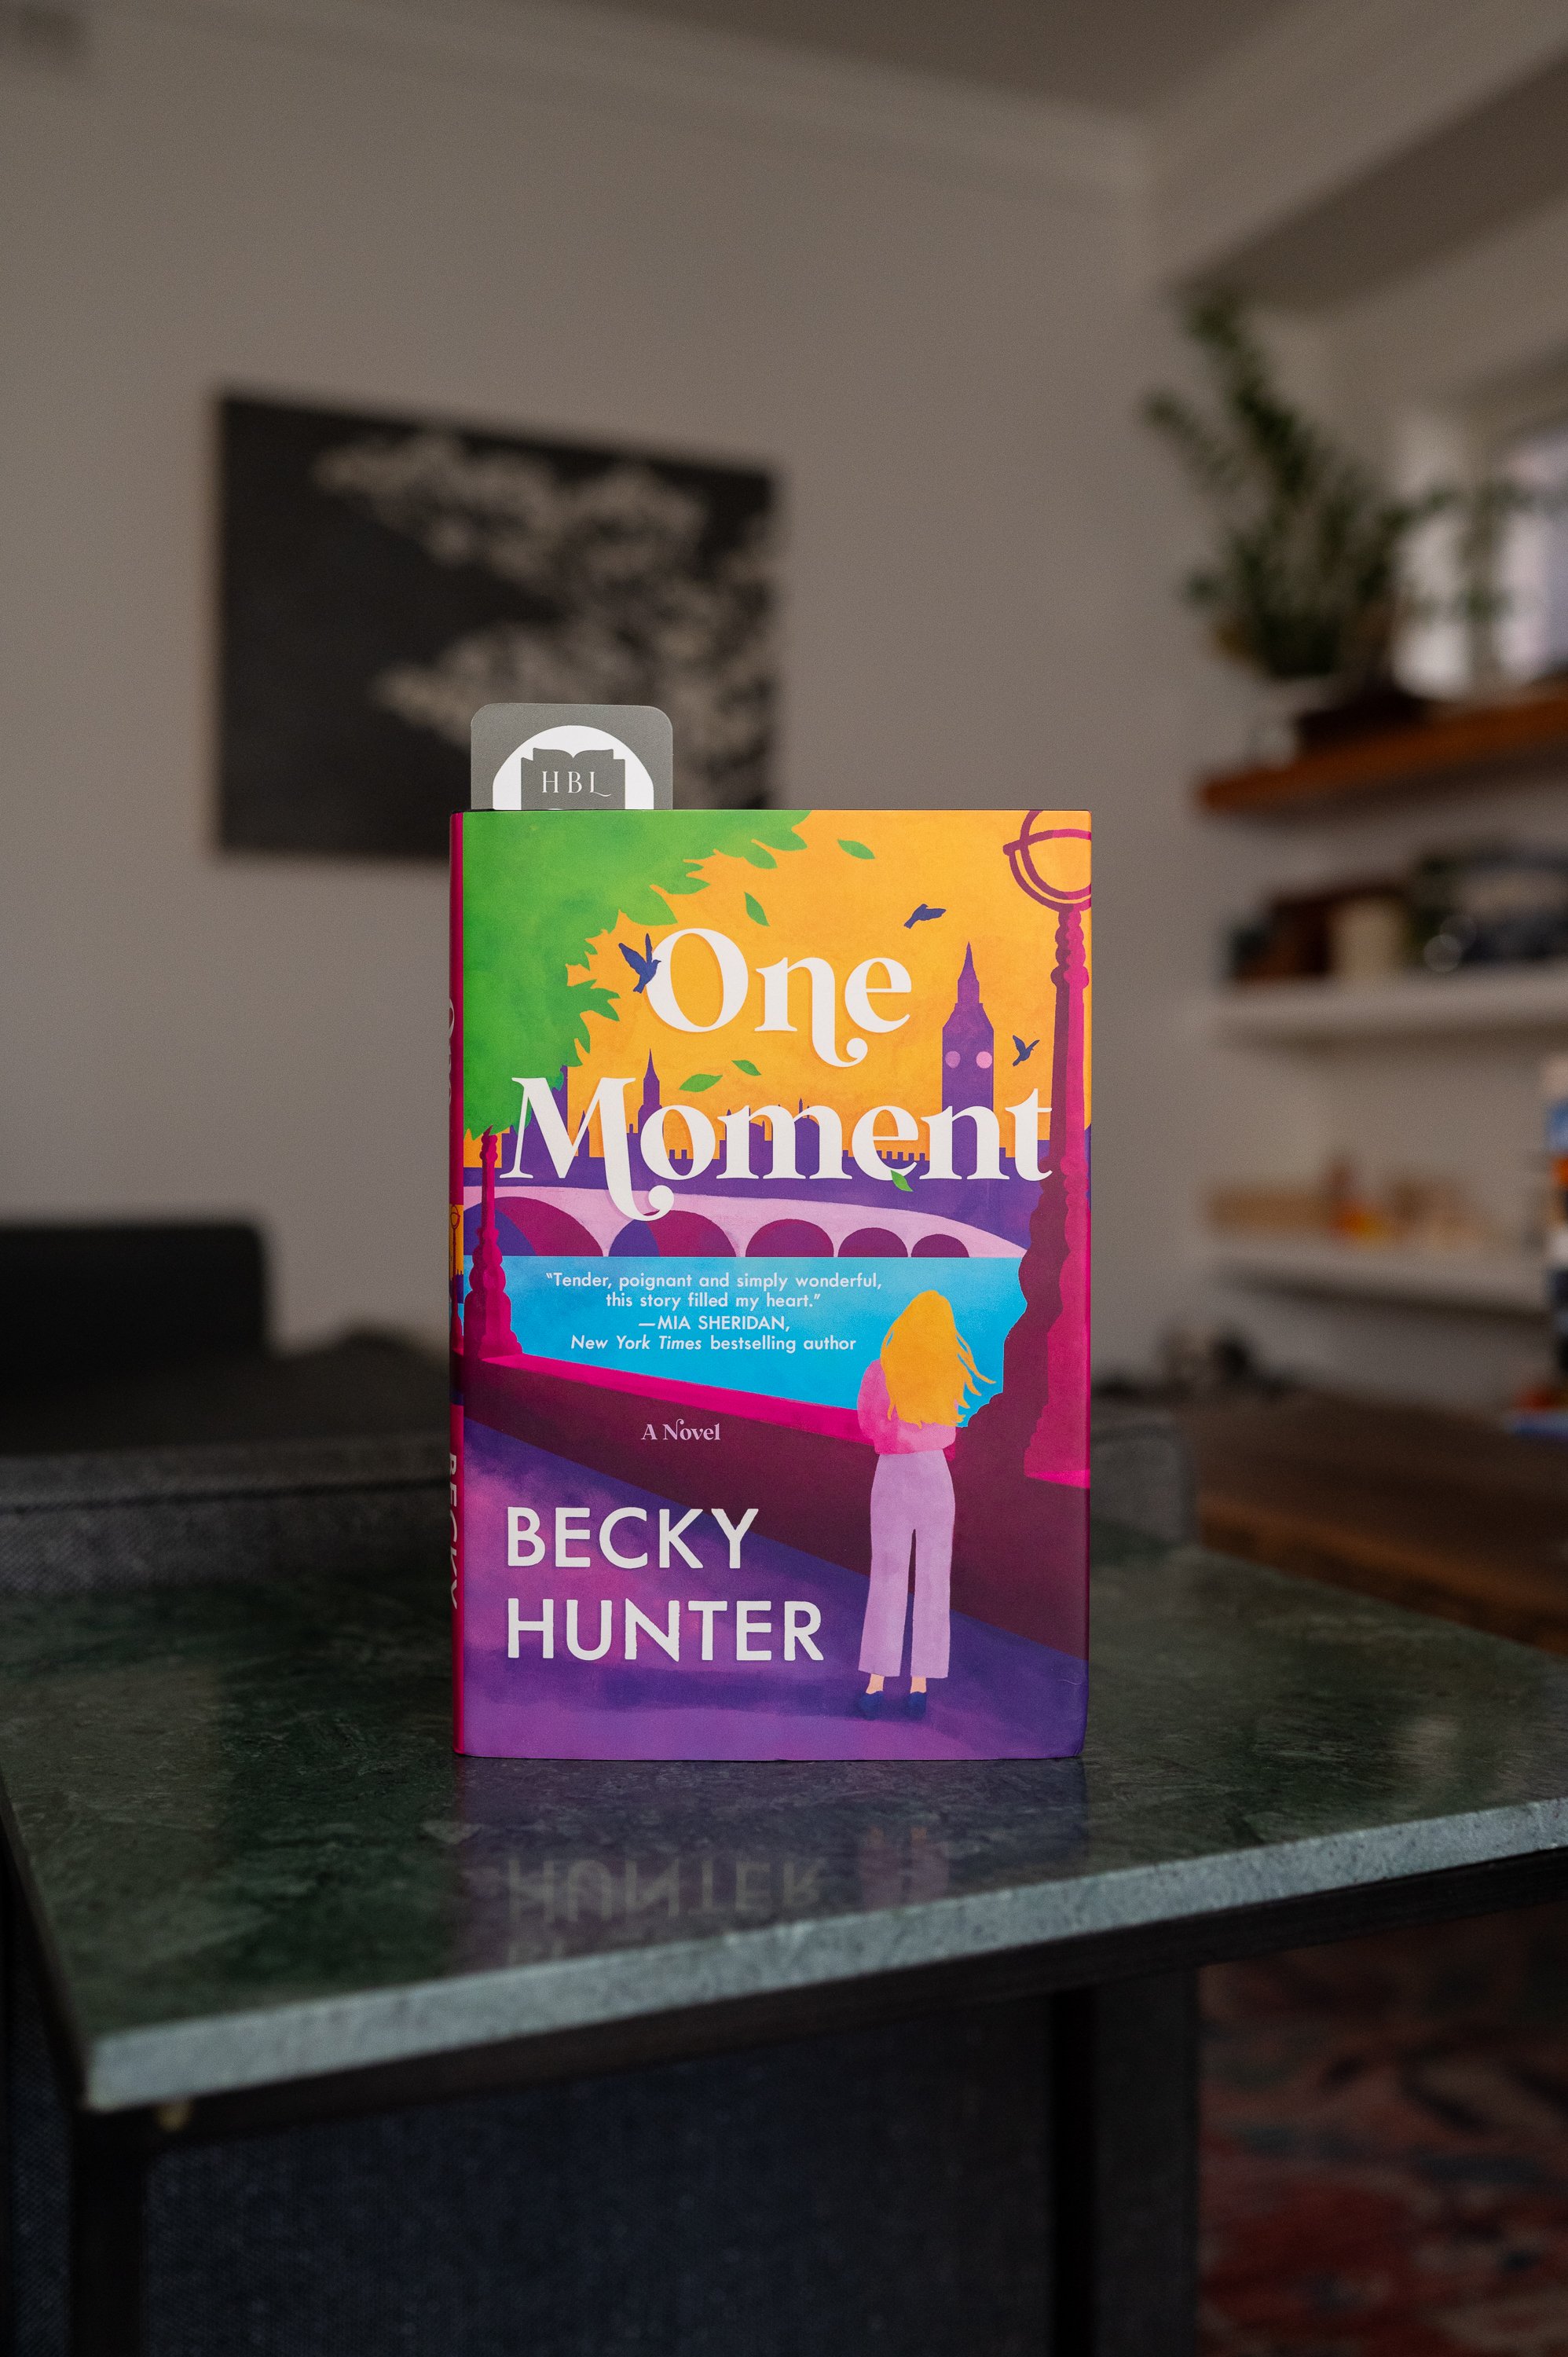 One Moment by Becky Hunter